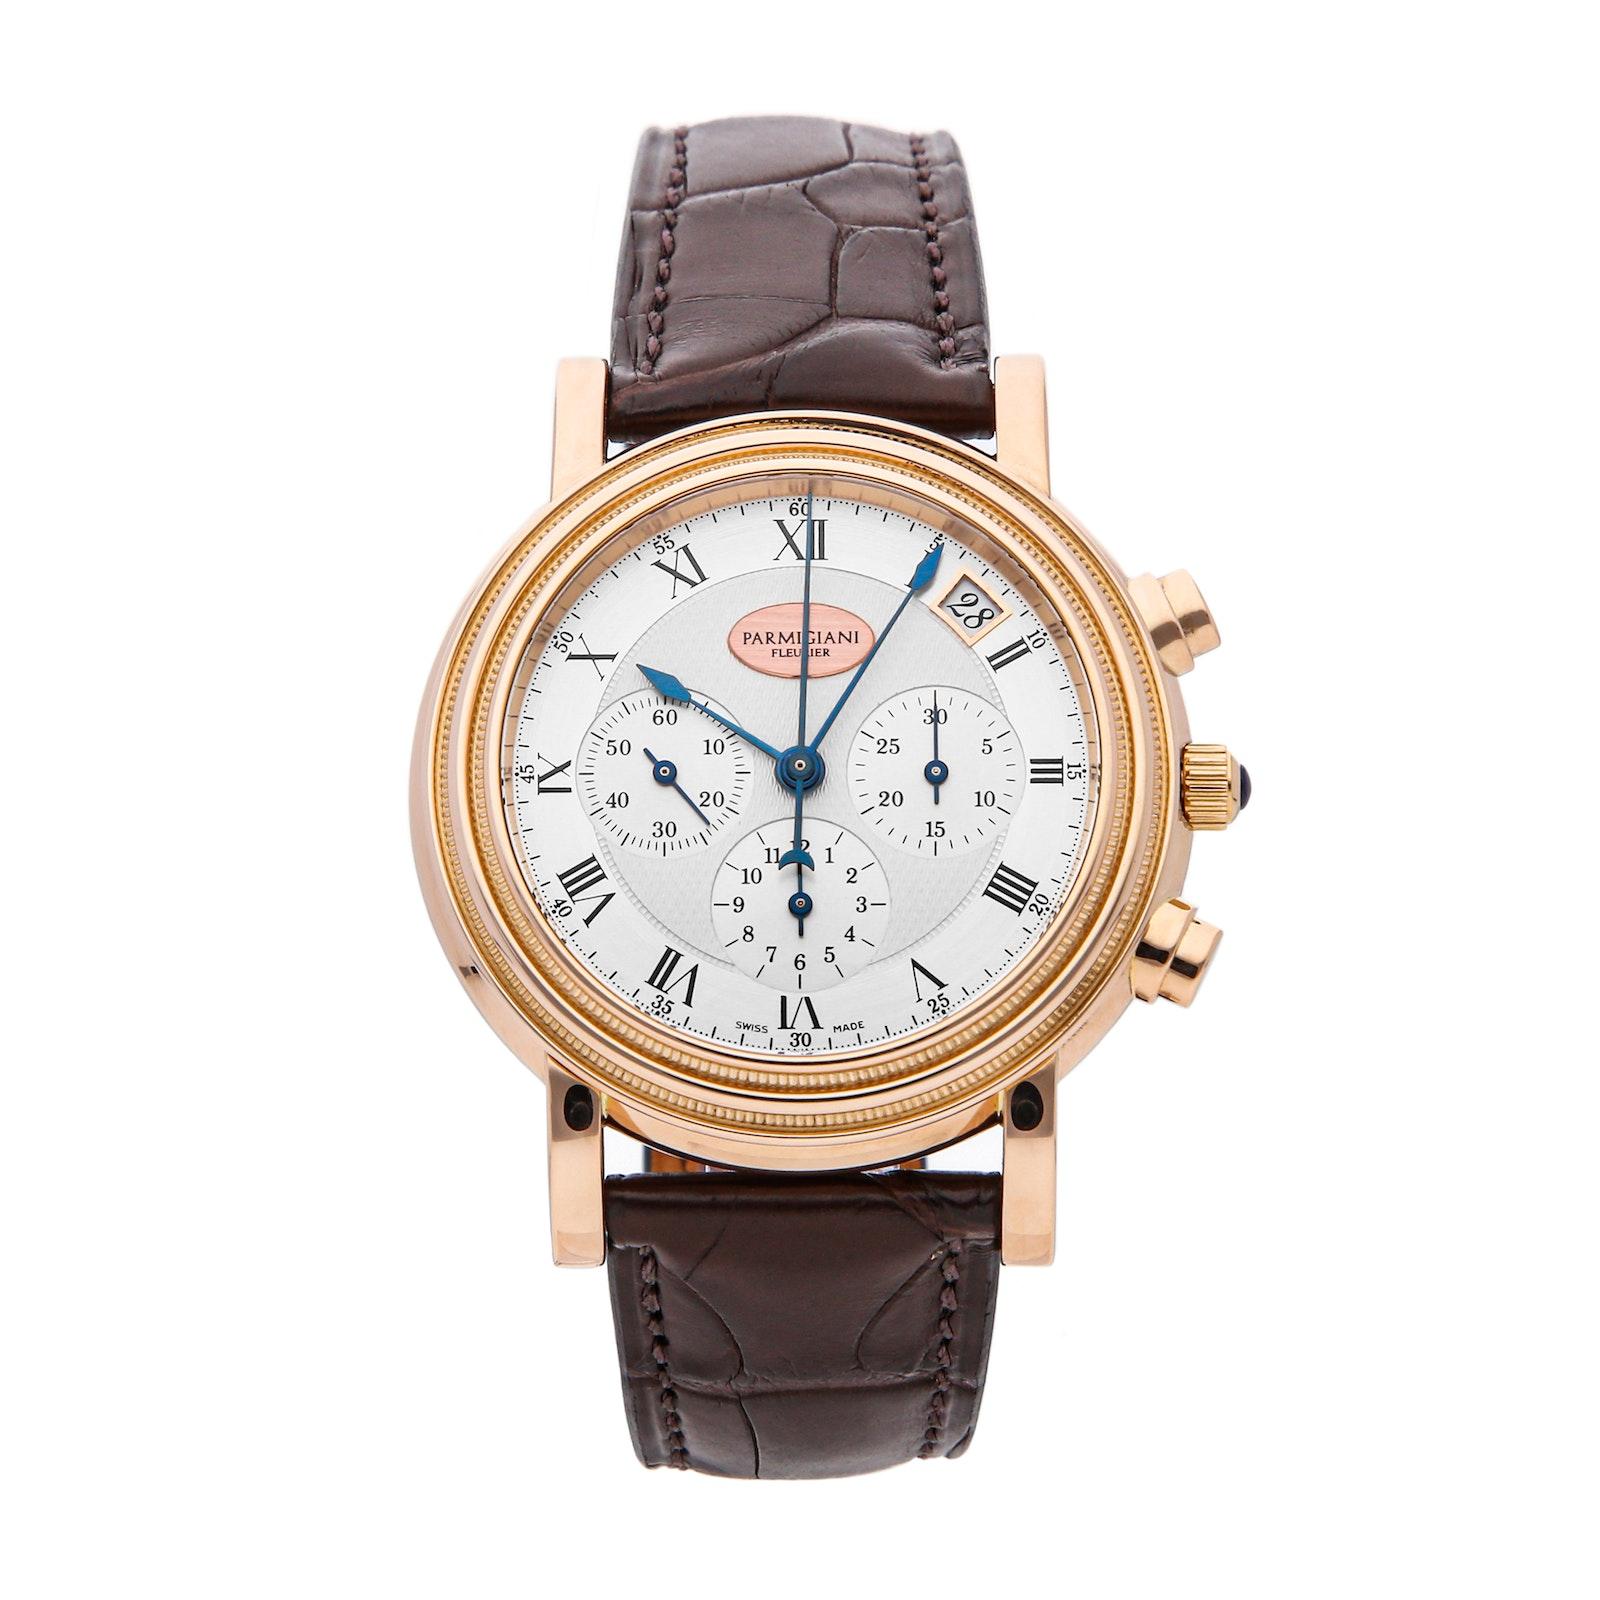 Toric Chronograph Automatic in Rose Gold on Crocodile Strap with Silver Roman Dial